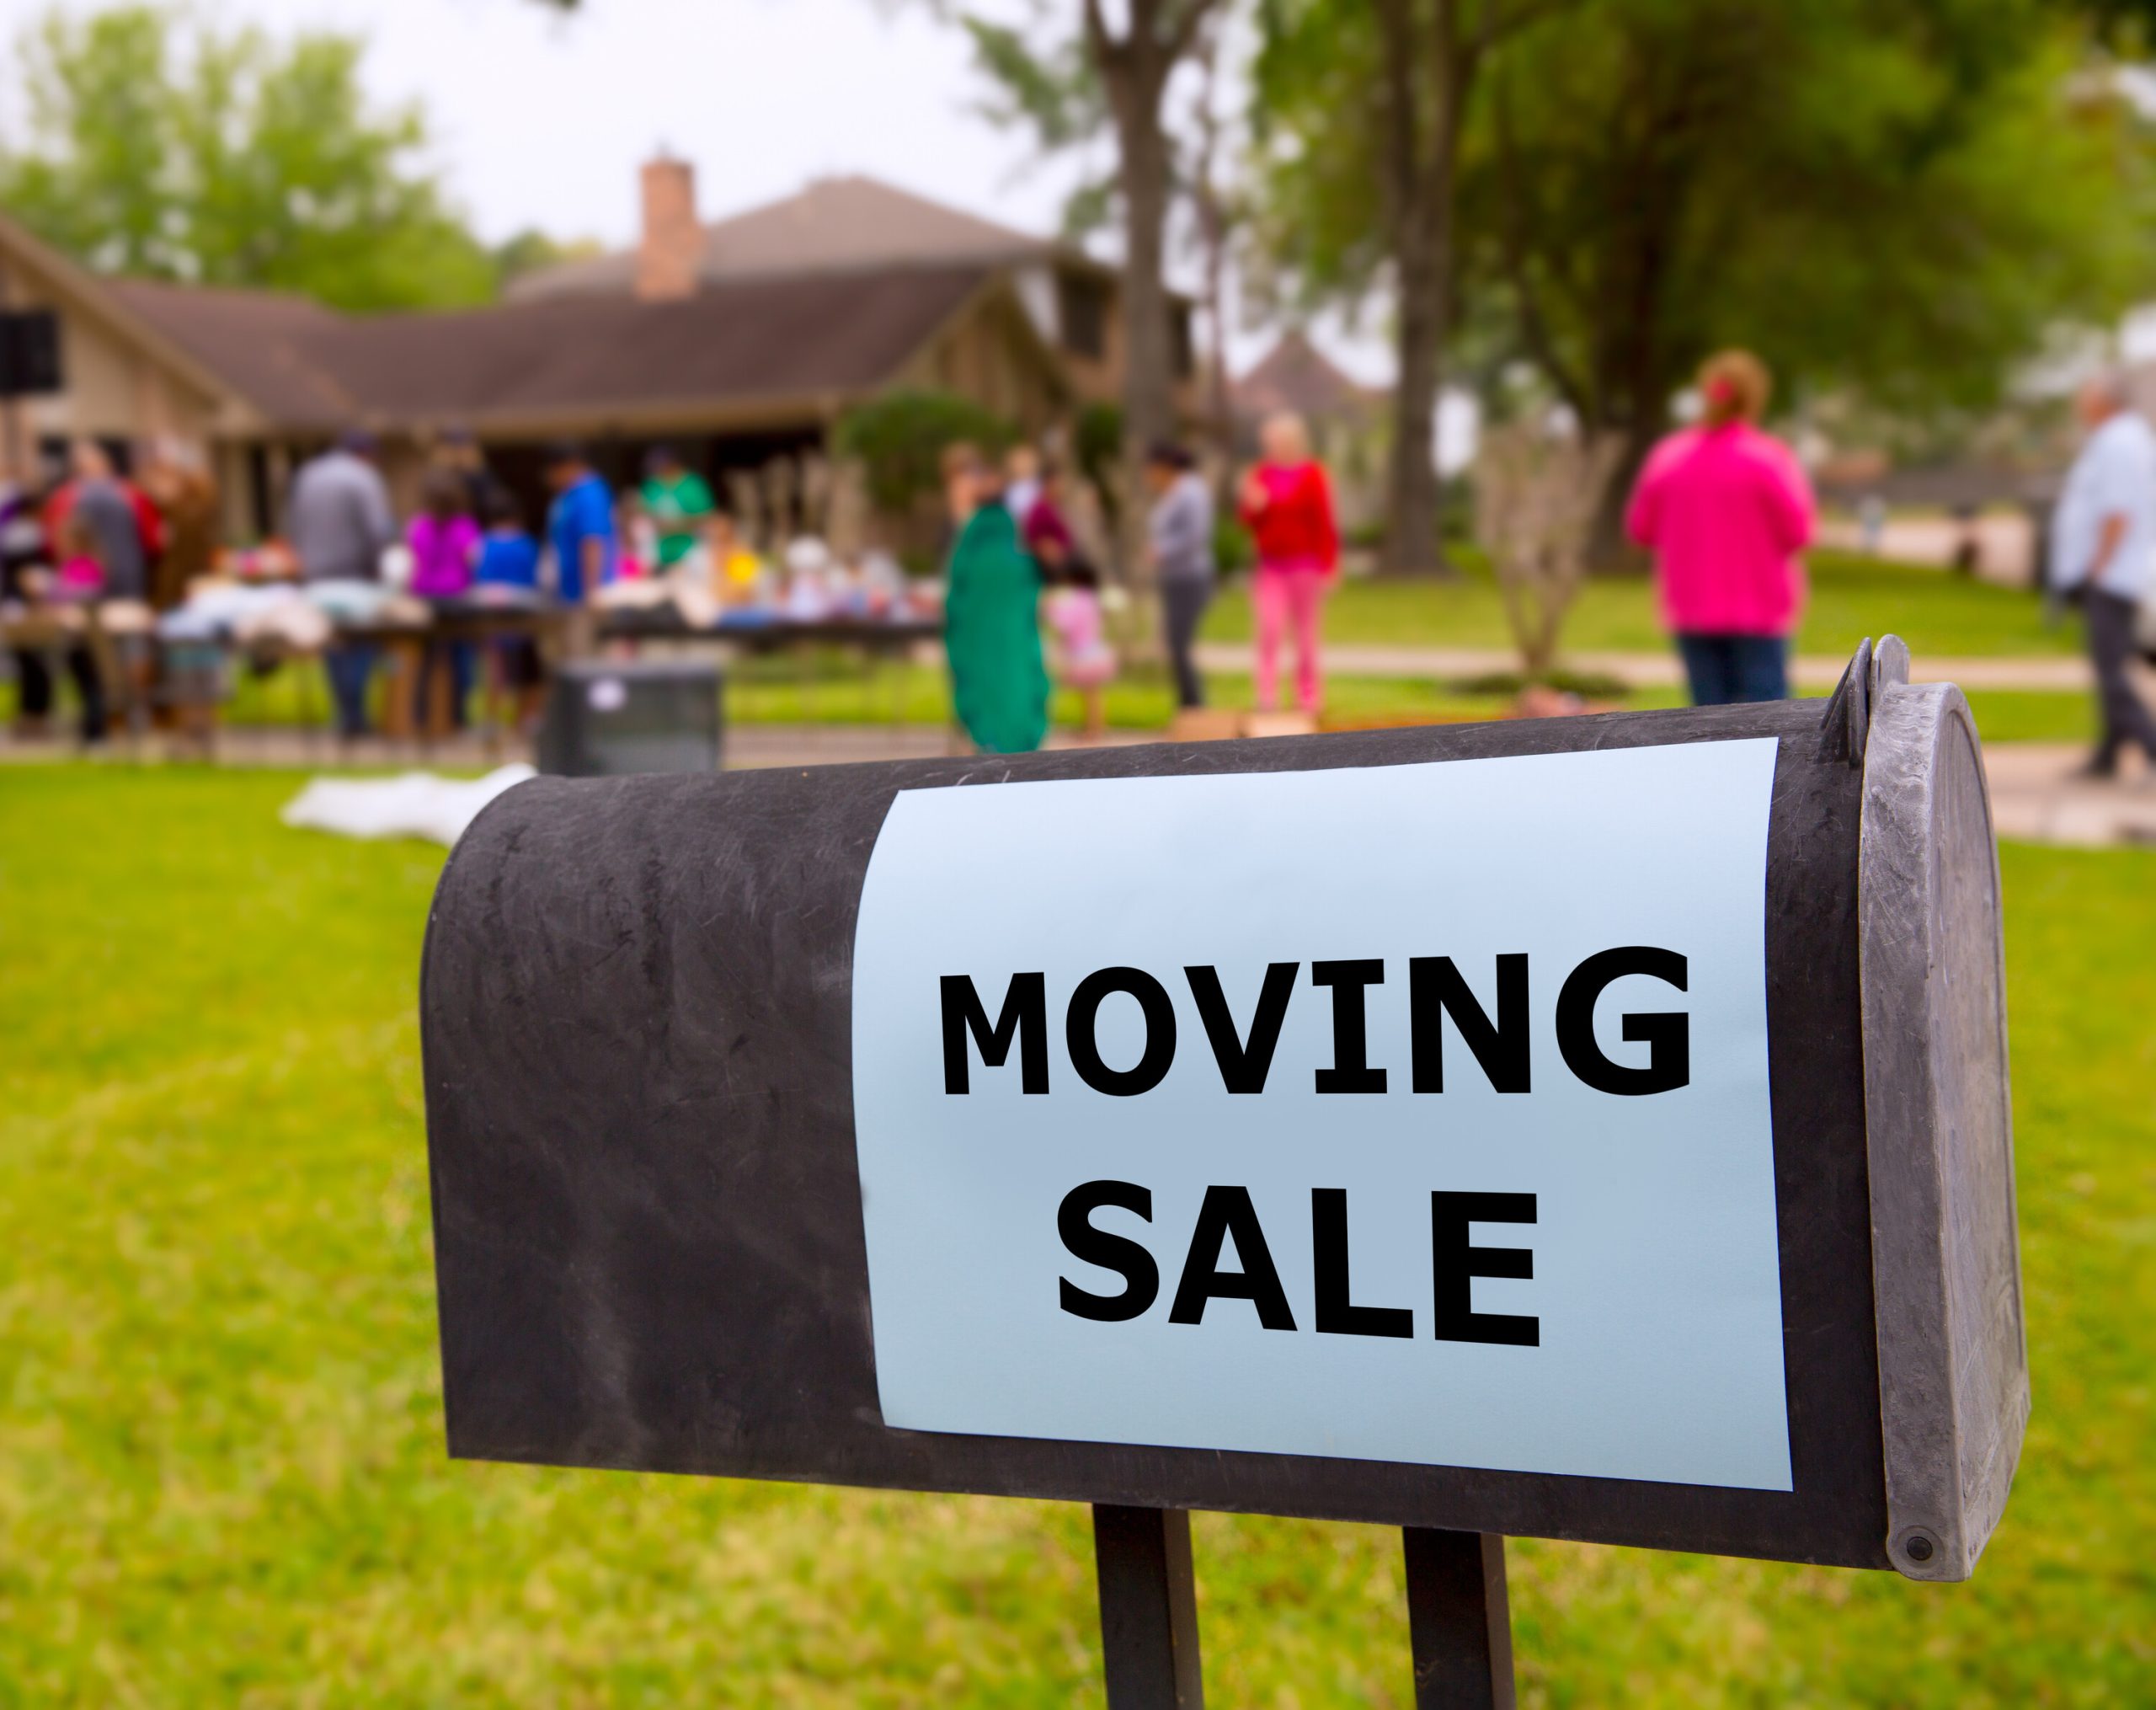 Moving sale sign posted on a mailbox with people in the background out of focus shopping at a moving sale.